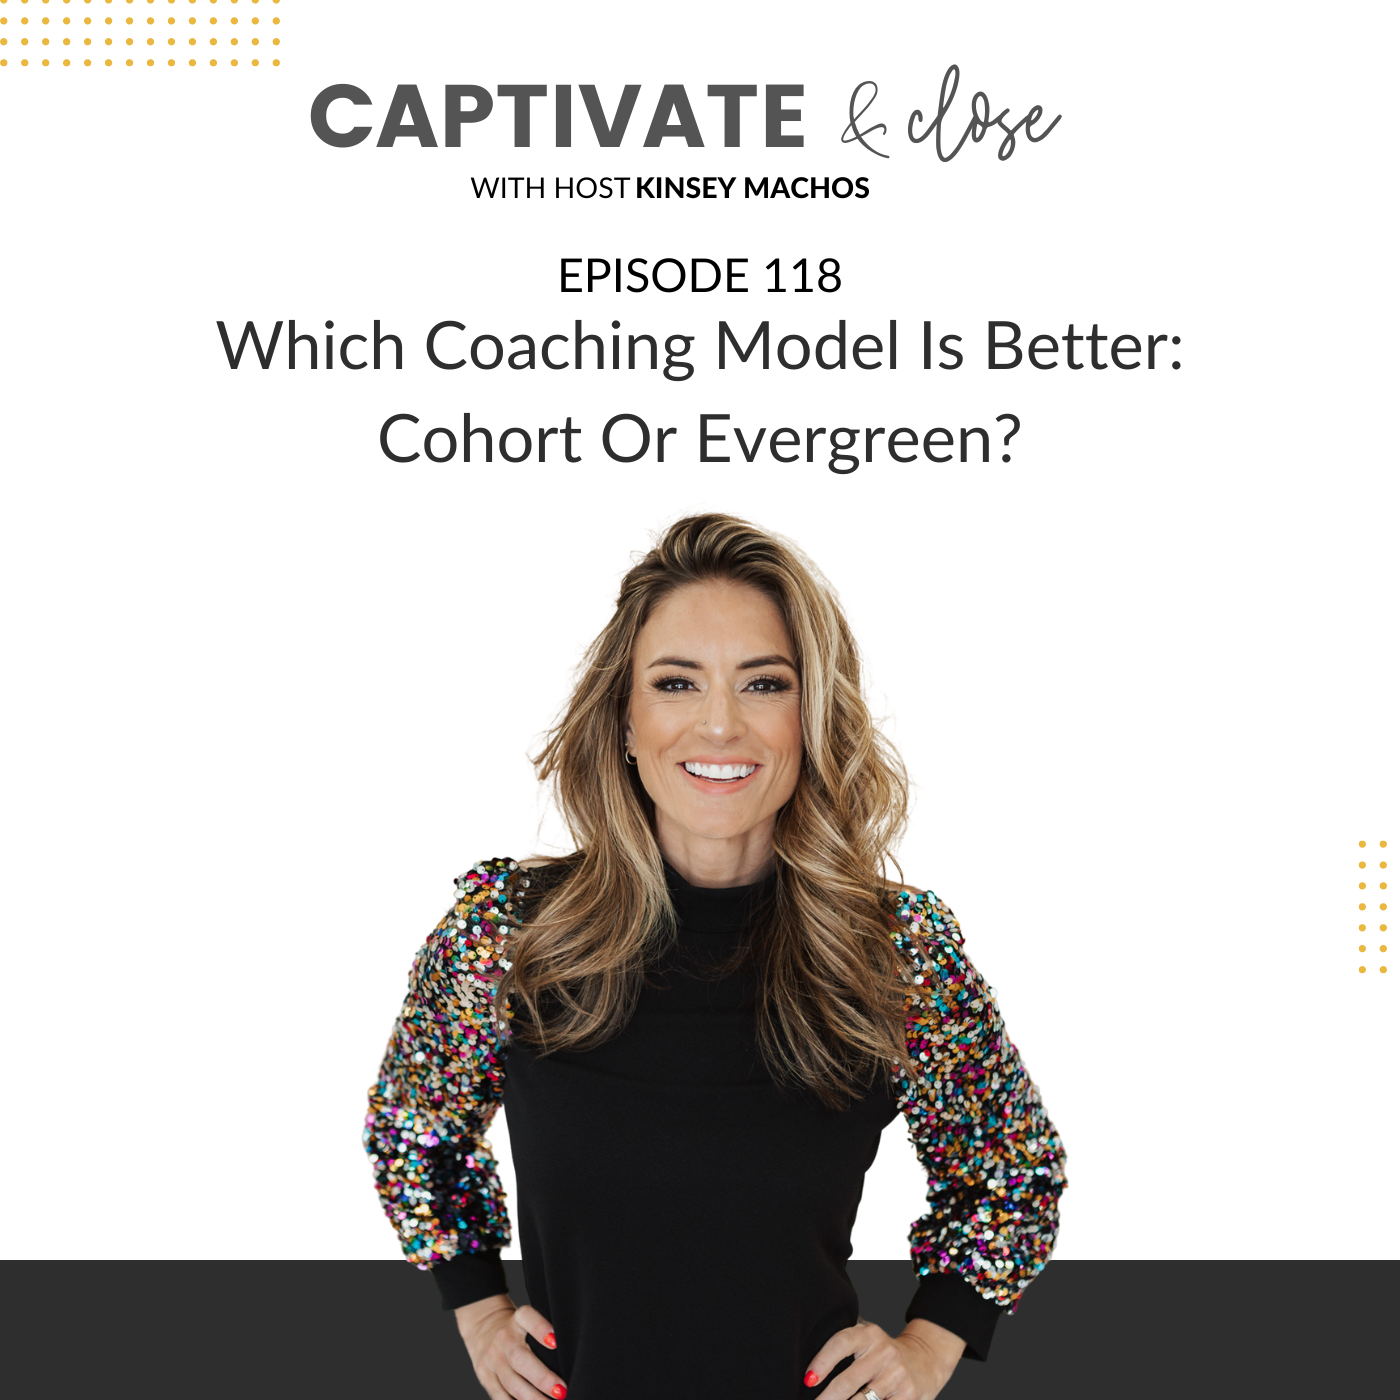 Which Coaching Model Is Better: Cohort Or Evergreen?